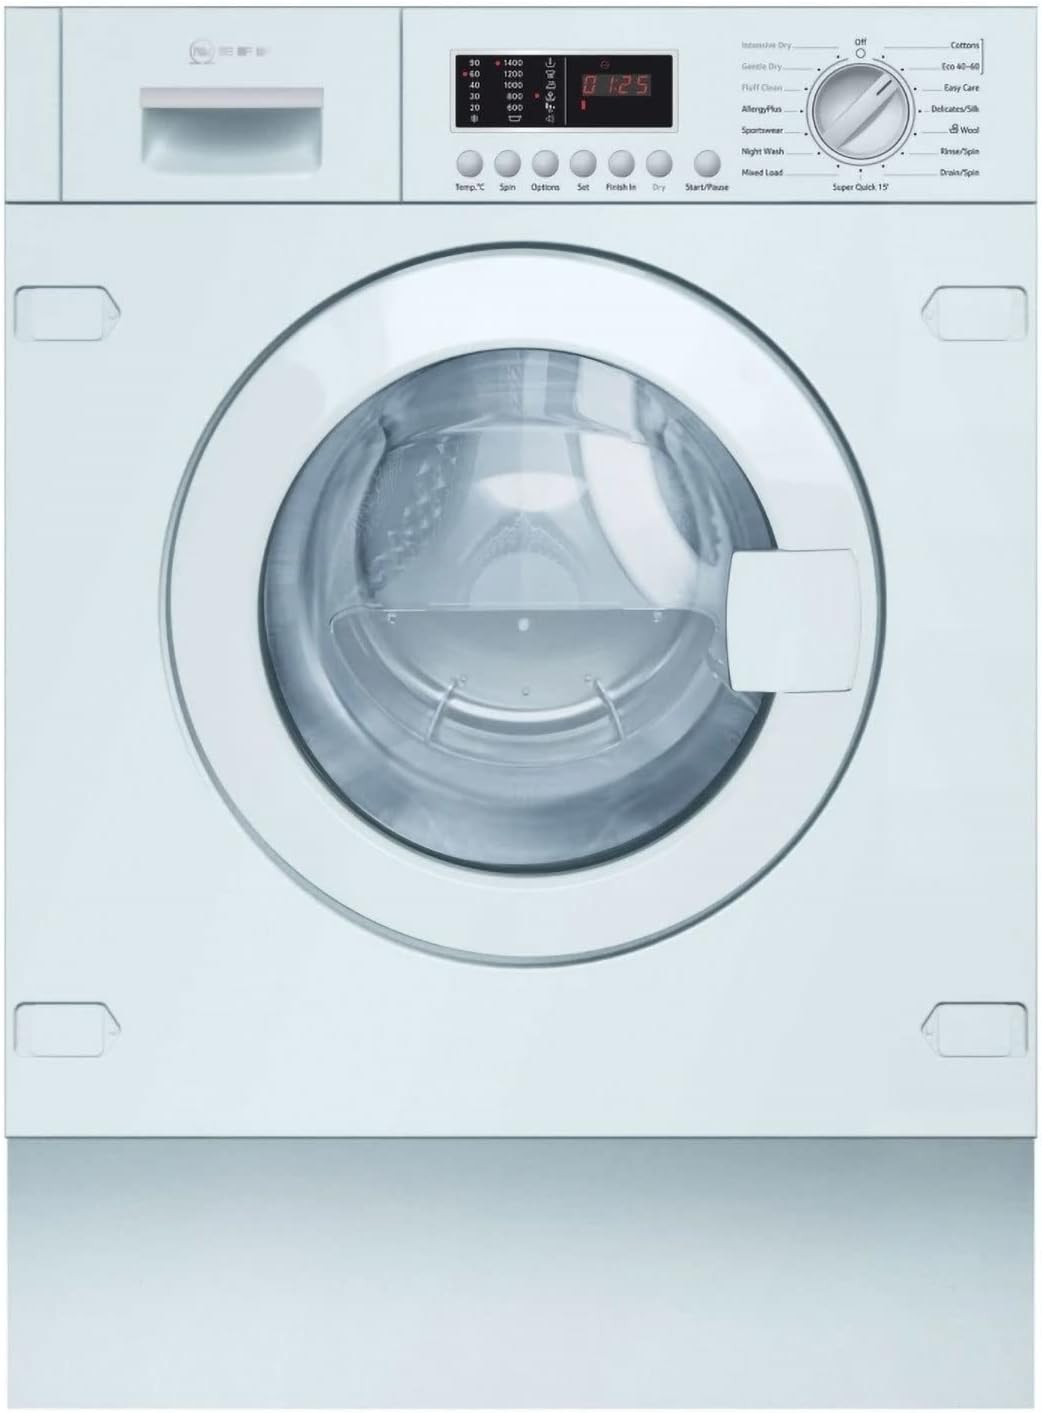 Neff V6540X2GB Built in Washer Dryer, 7kg wash/4kg dry capacity, 1400rpm, Time delay/Time remaining, Sensor drying, LED Display, White - Amazing Gadgets Outlet